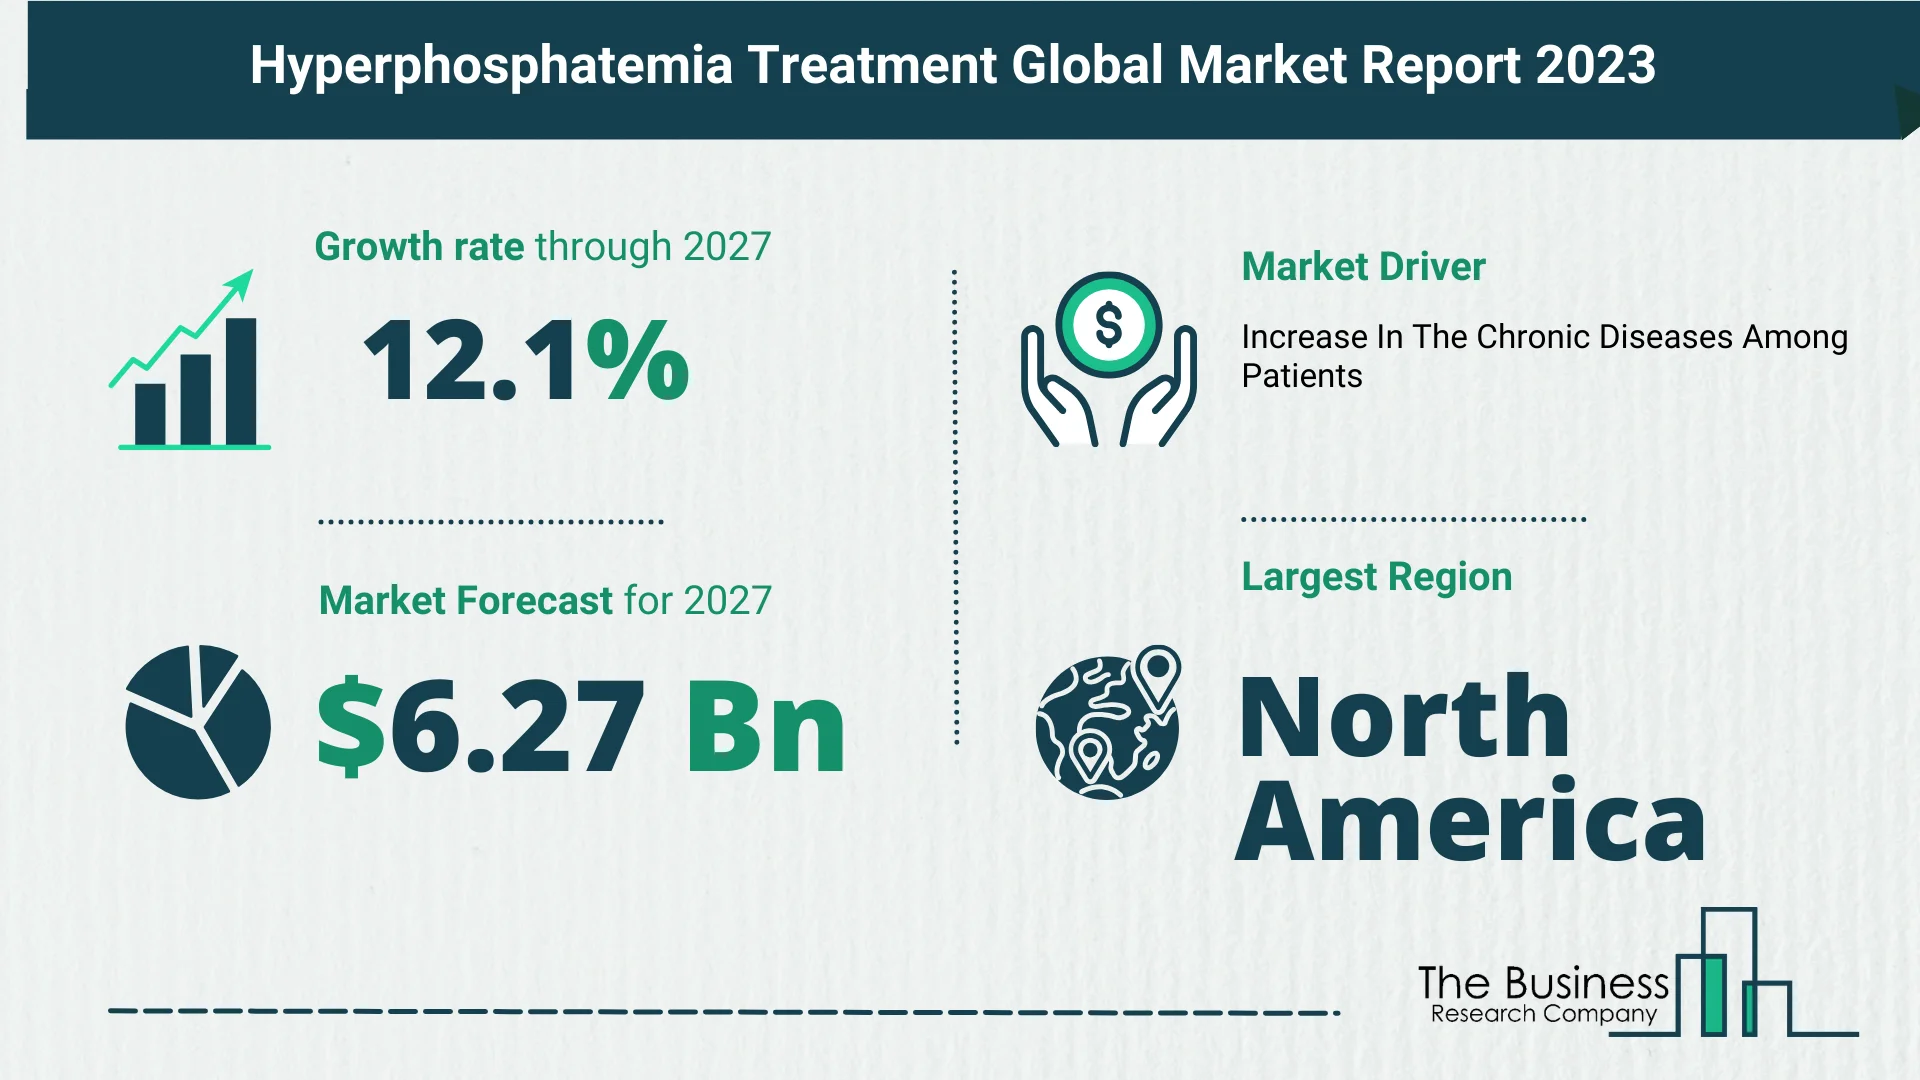 Overview Of The Hyperphosphatemia Treatment Market 2023: Size, Drivers, And Trends